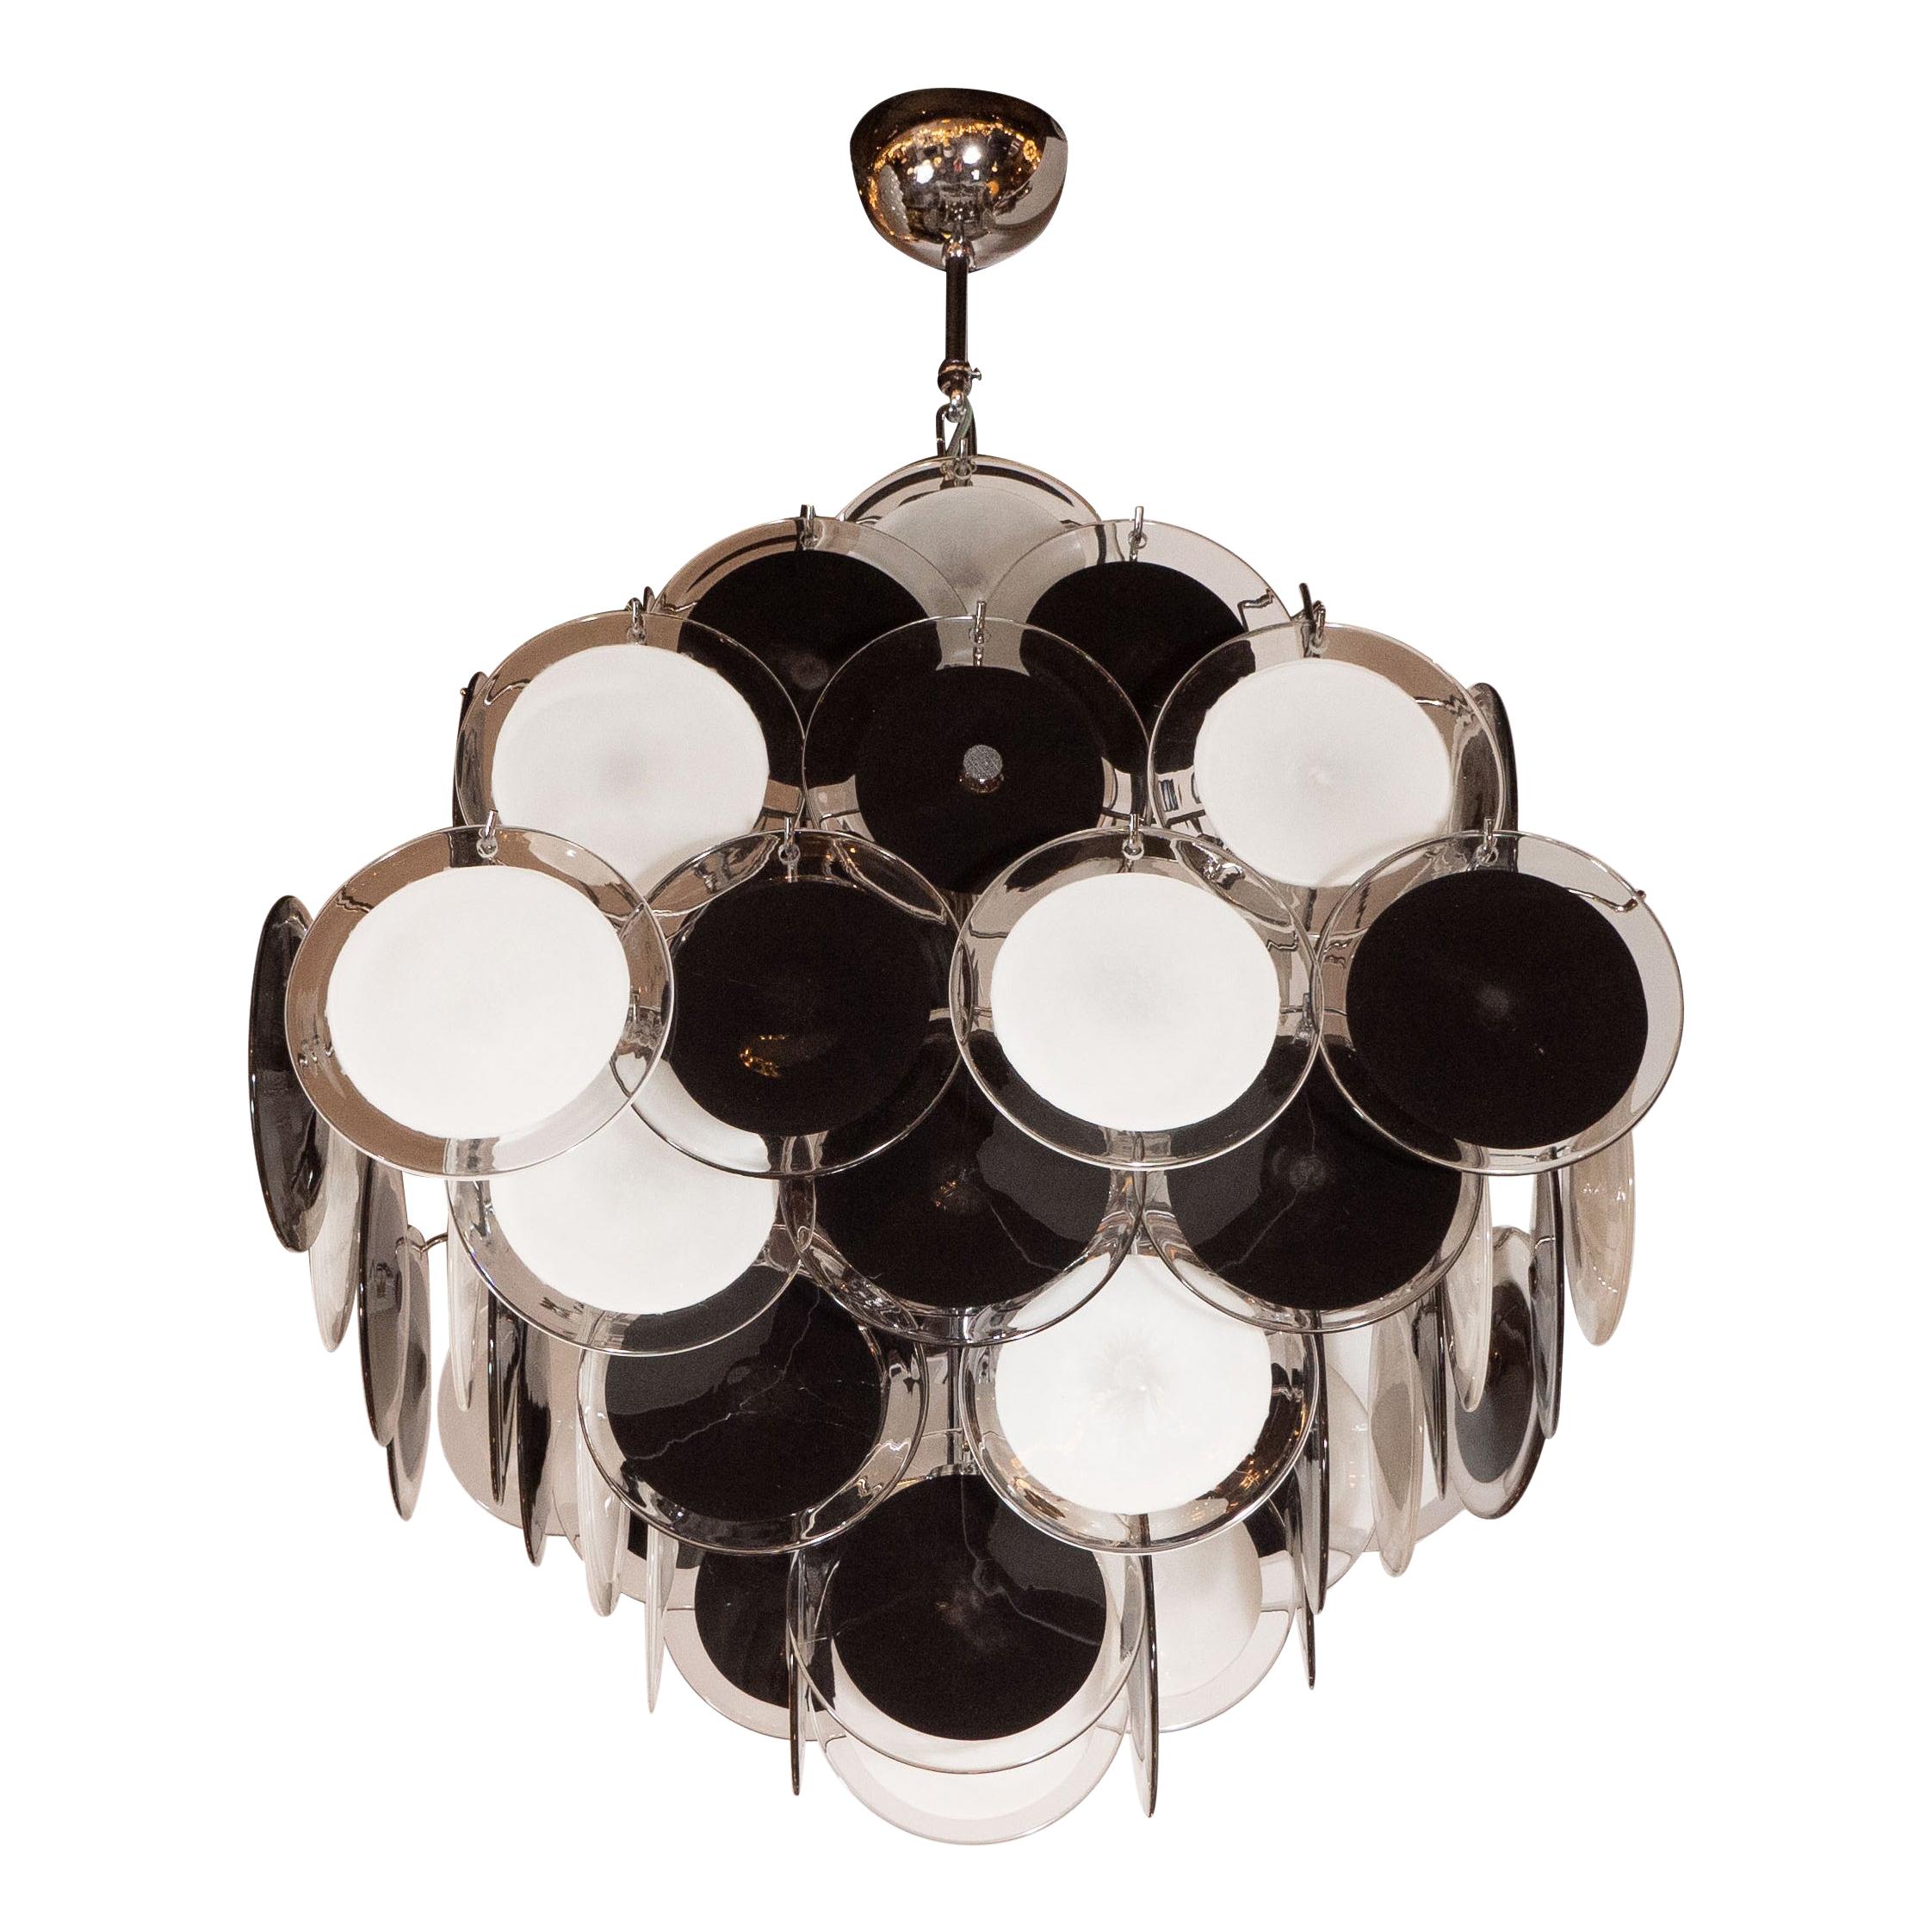 Modernist Pagoda Style Disc Chandelier in Handblown Murano Black and White Glass For Sale